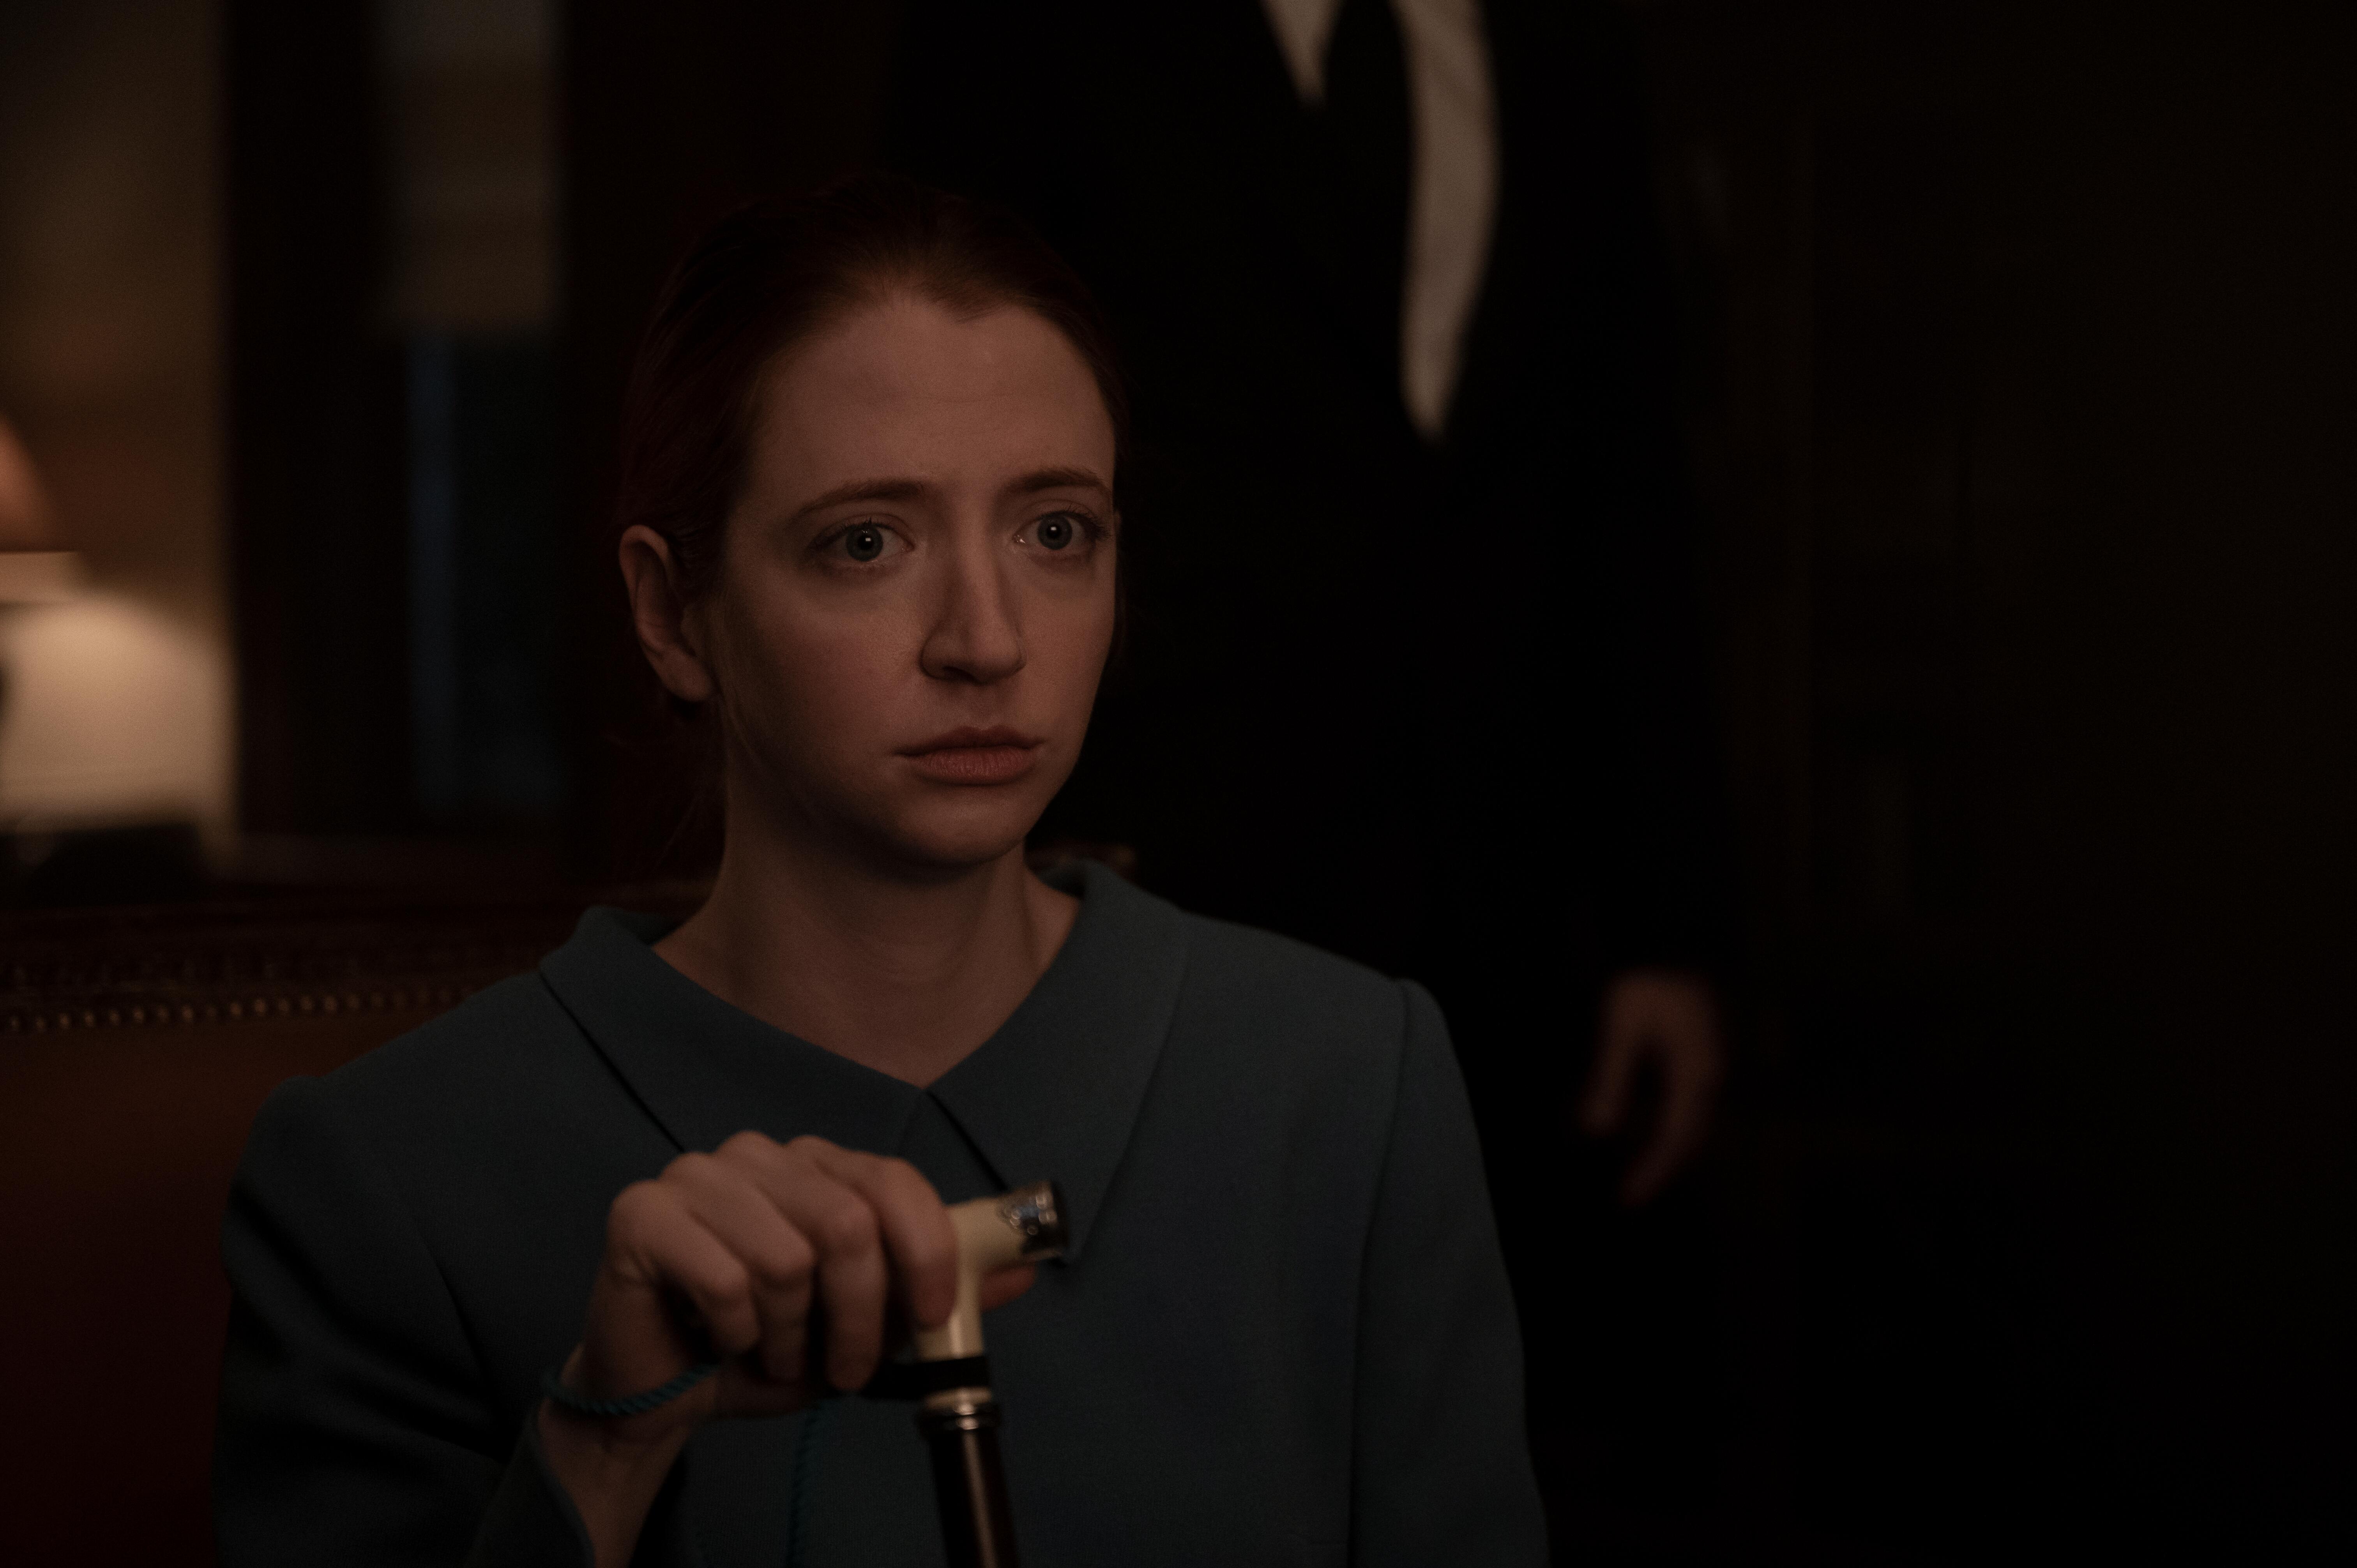 Nick's wife Rose holds her cane while sitting down in 'The Handmaid's Tale'